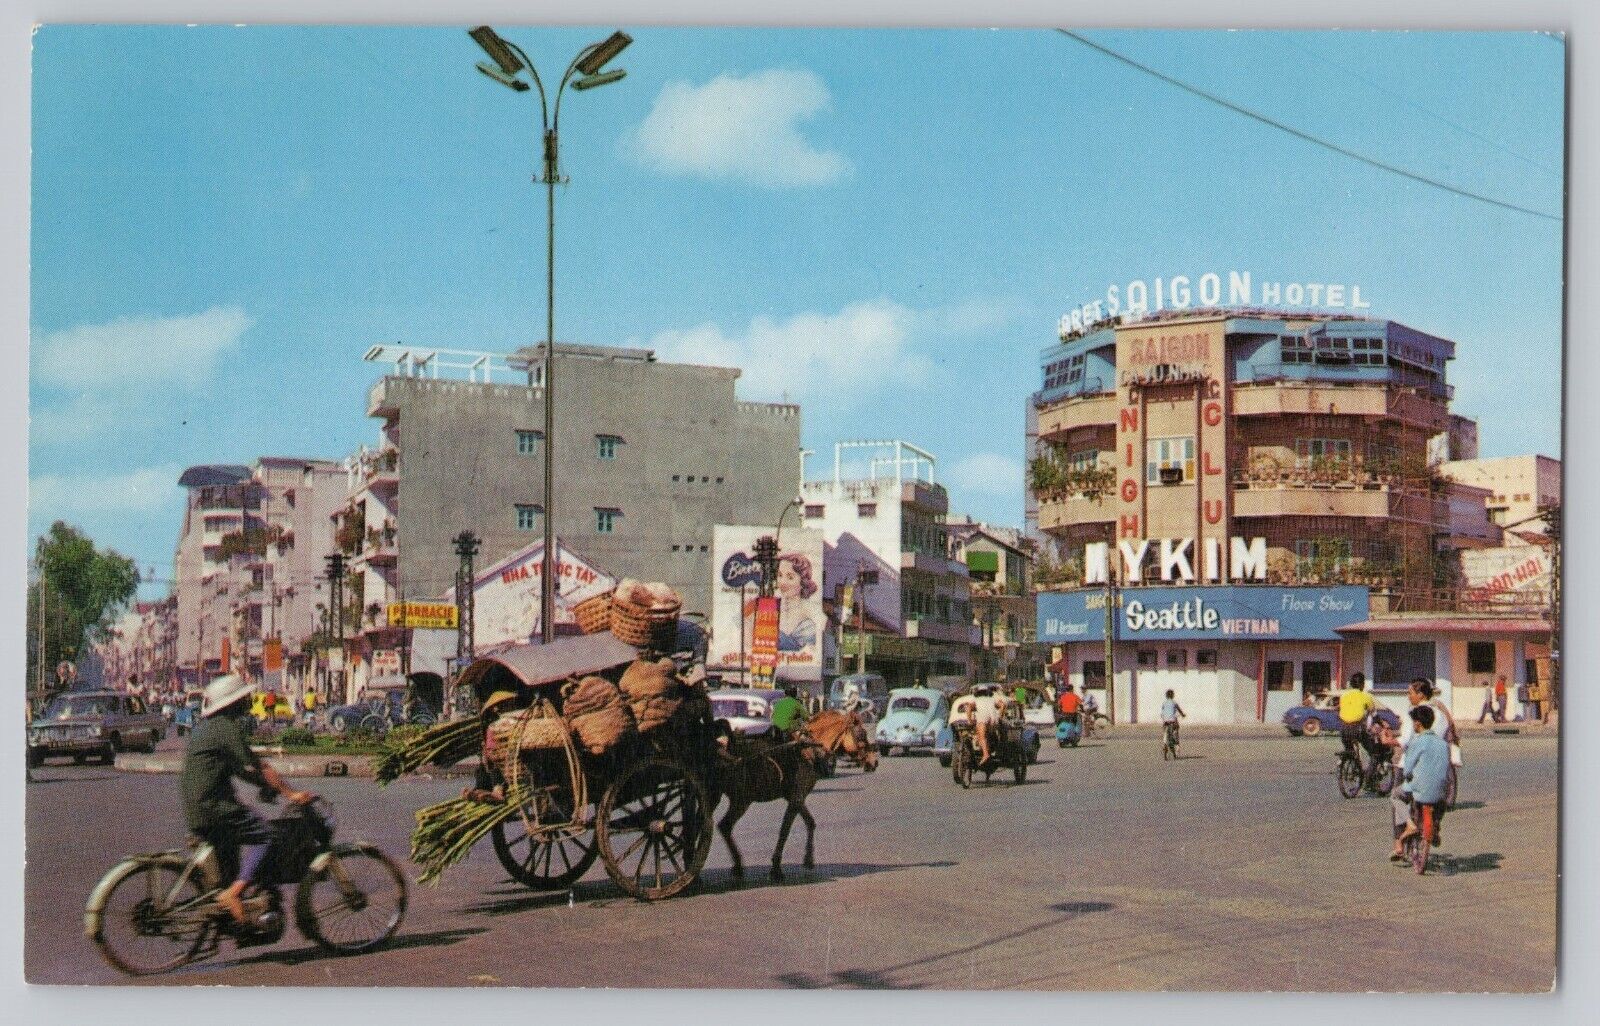 Saigon Hotel and Typical Vietnamese Transportation 1960s View